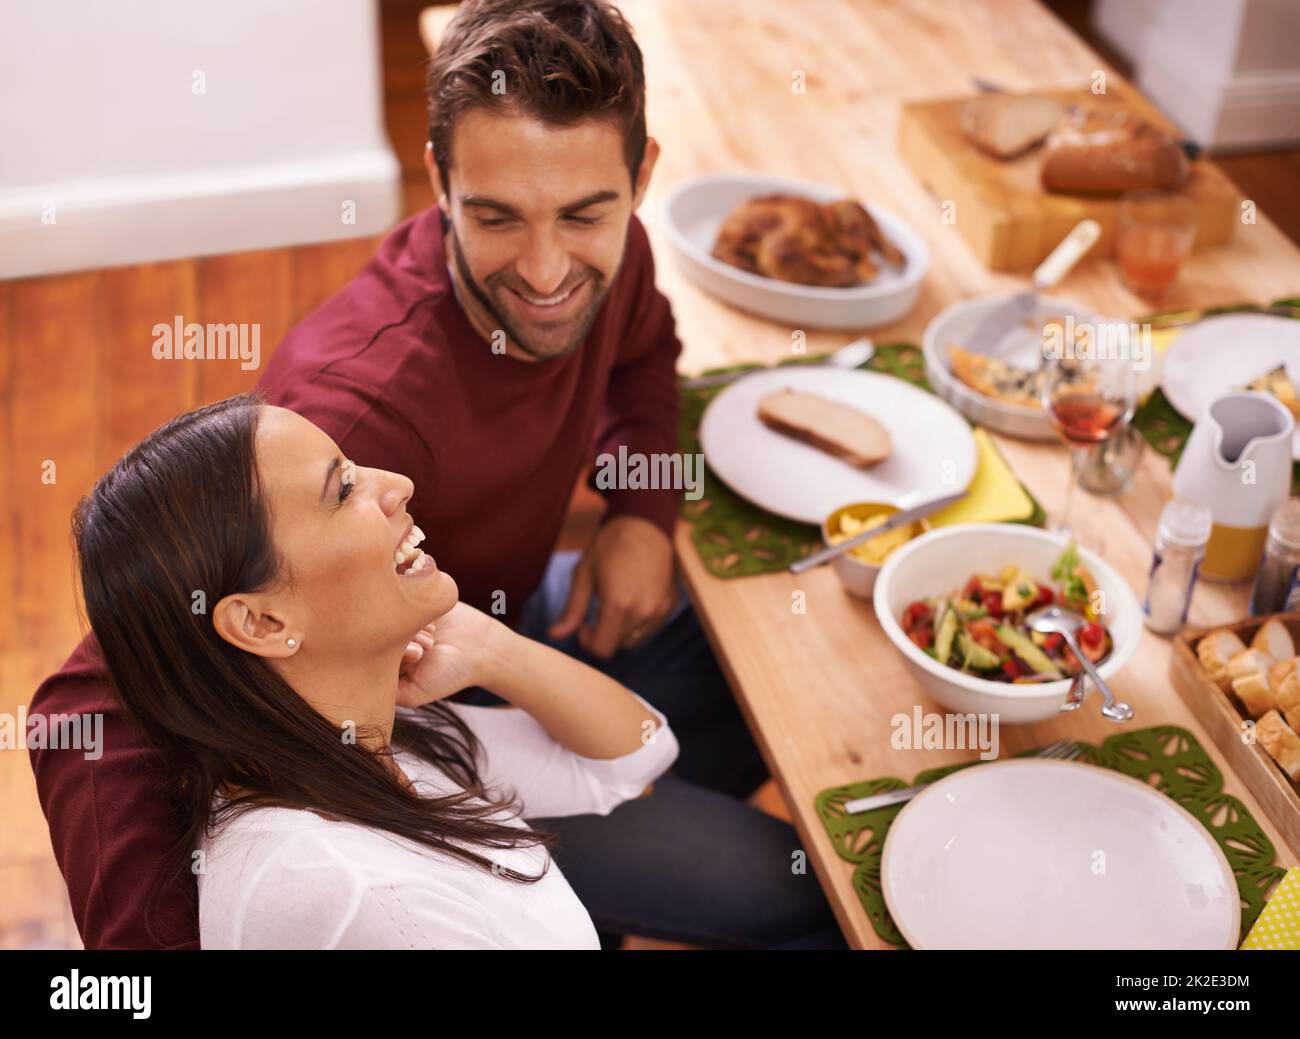 Love and food - two of the best things in life. A happy couple enjoying a family meal around the table. Stock Photo